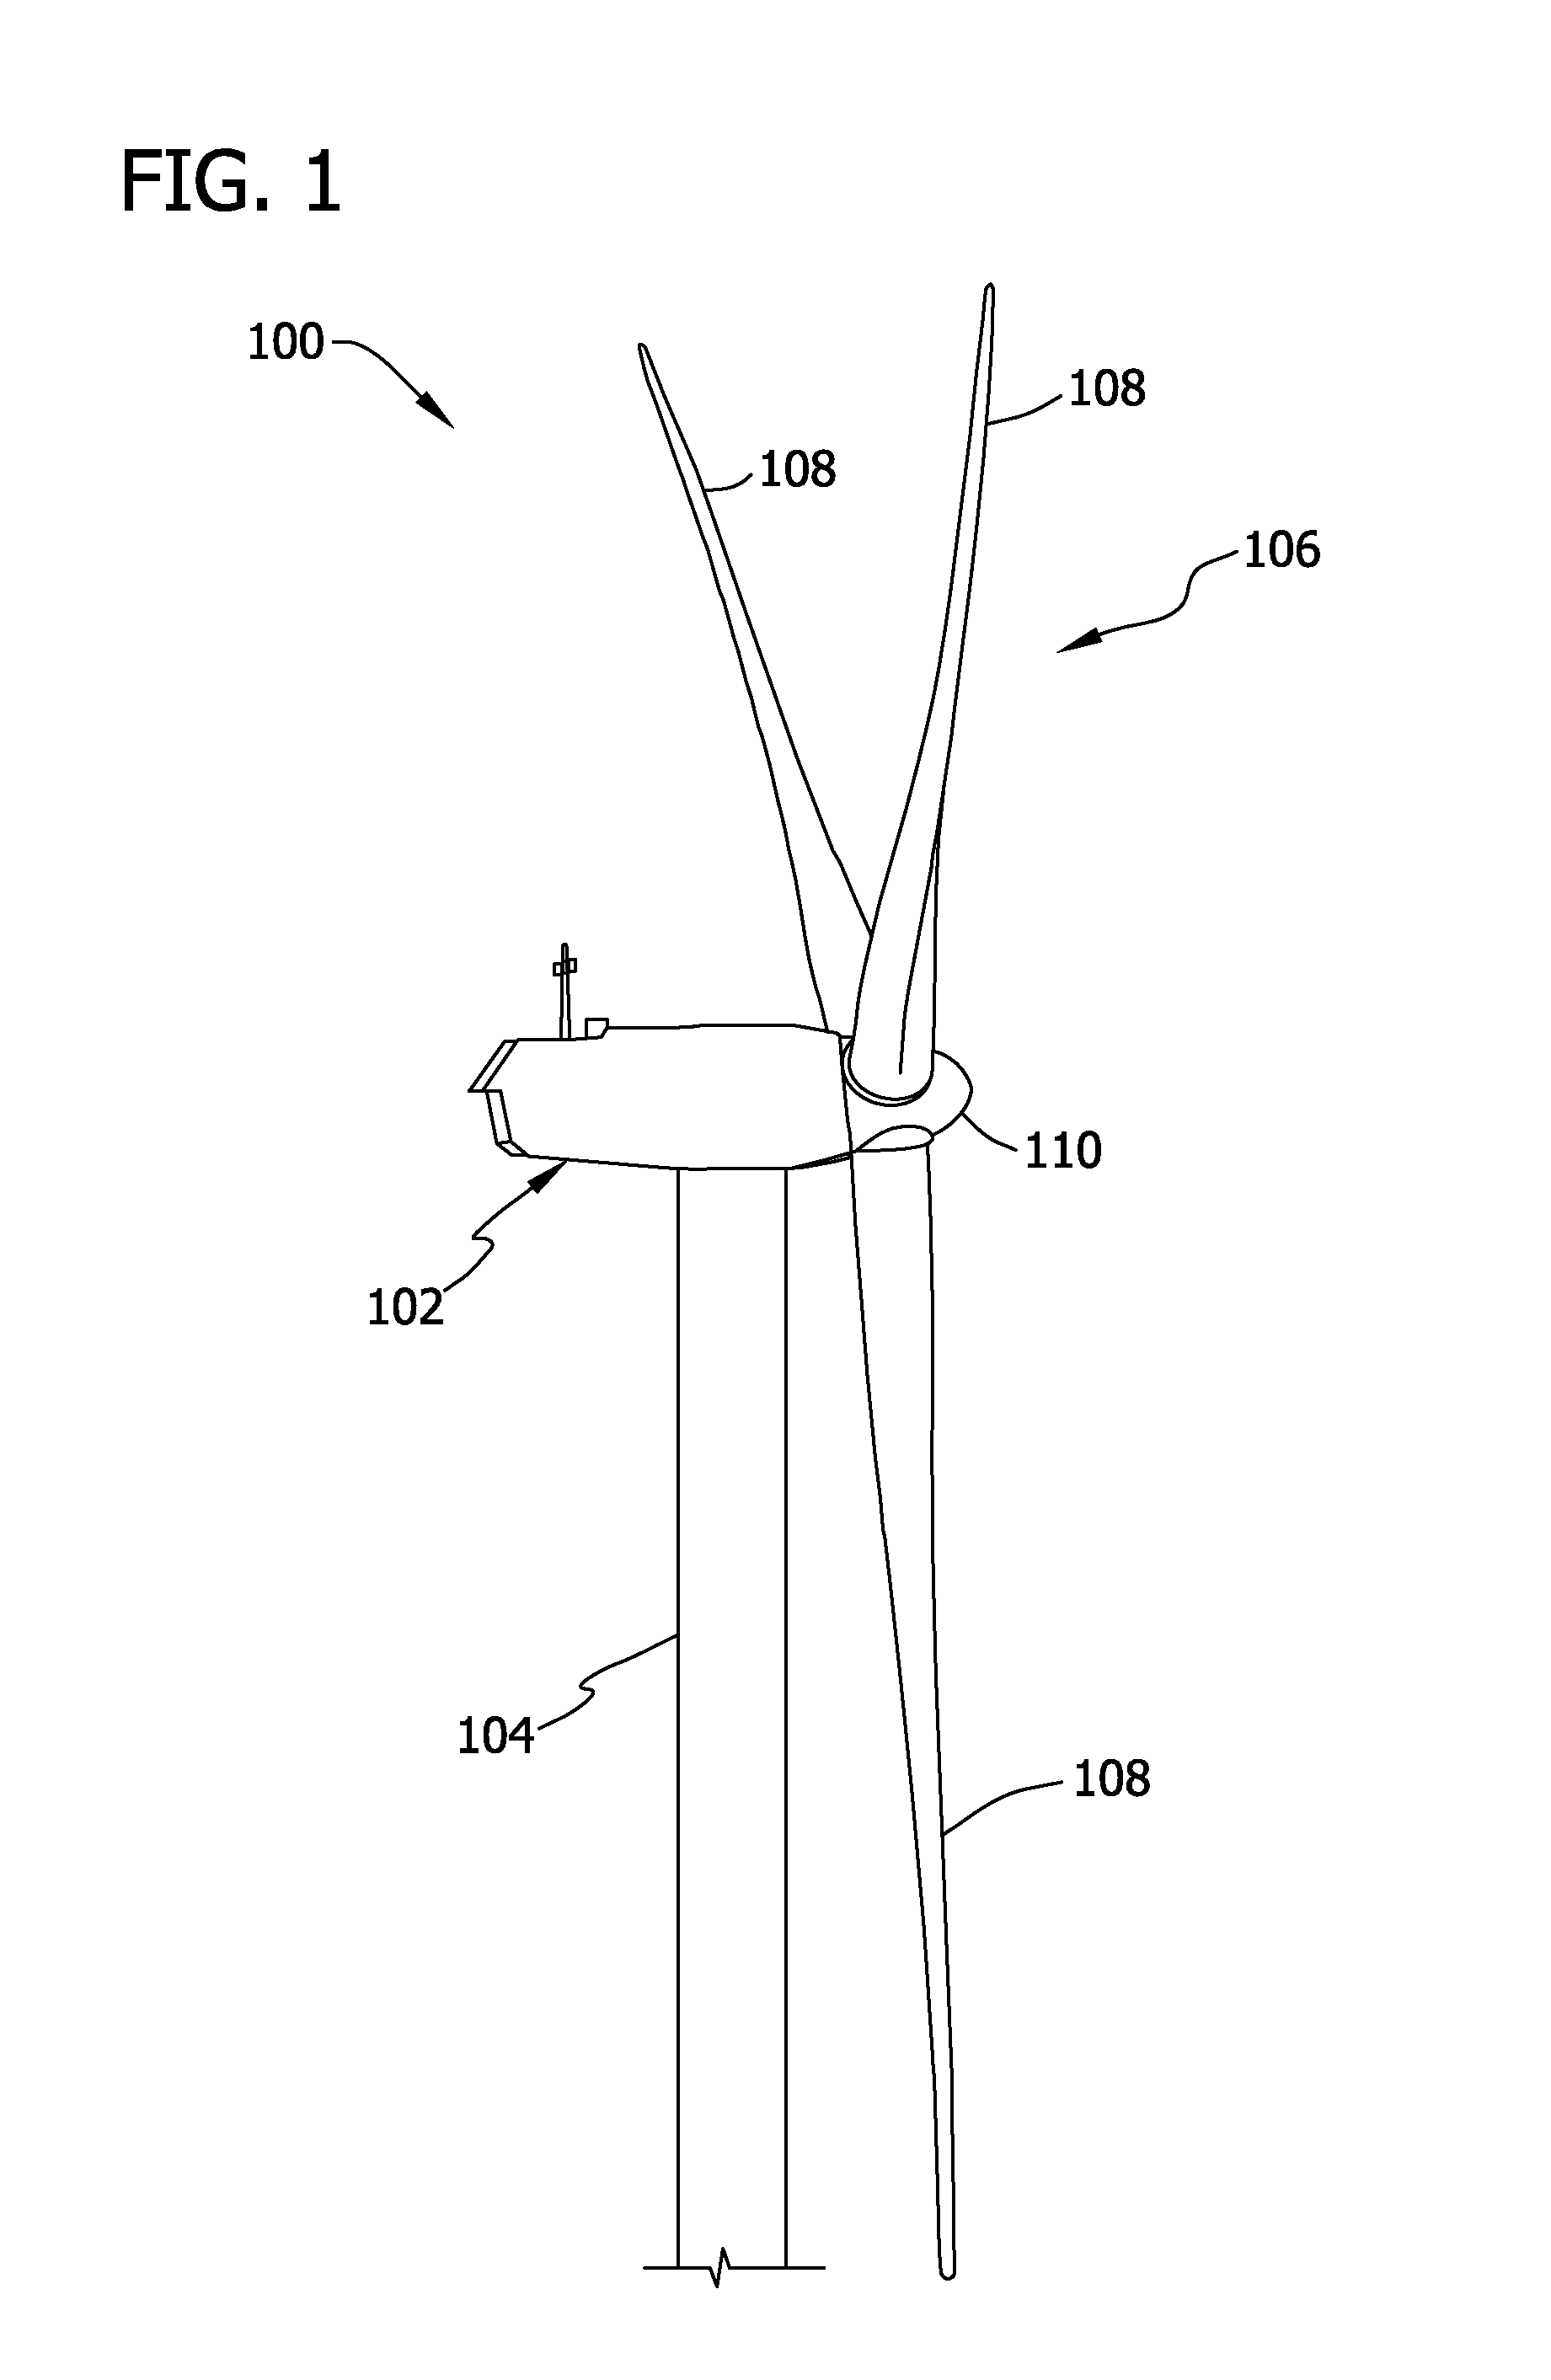 System, device, and method for controlling a wind turbine using seasonal parameters